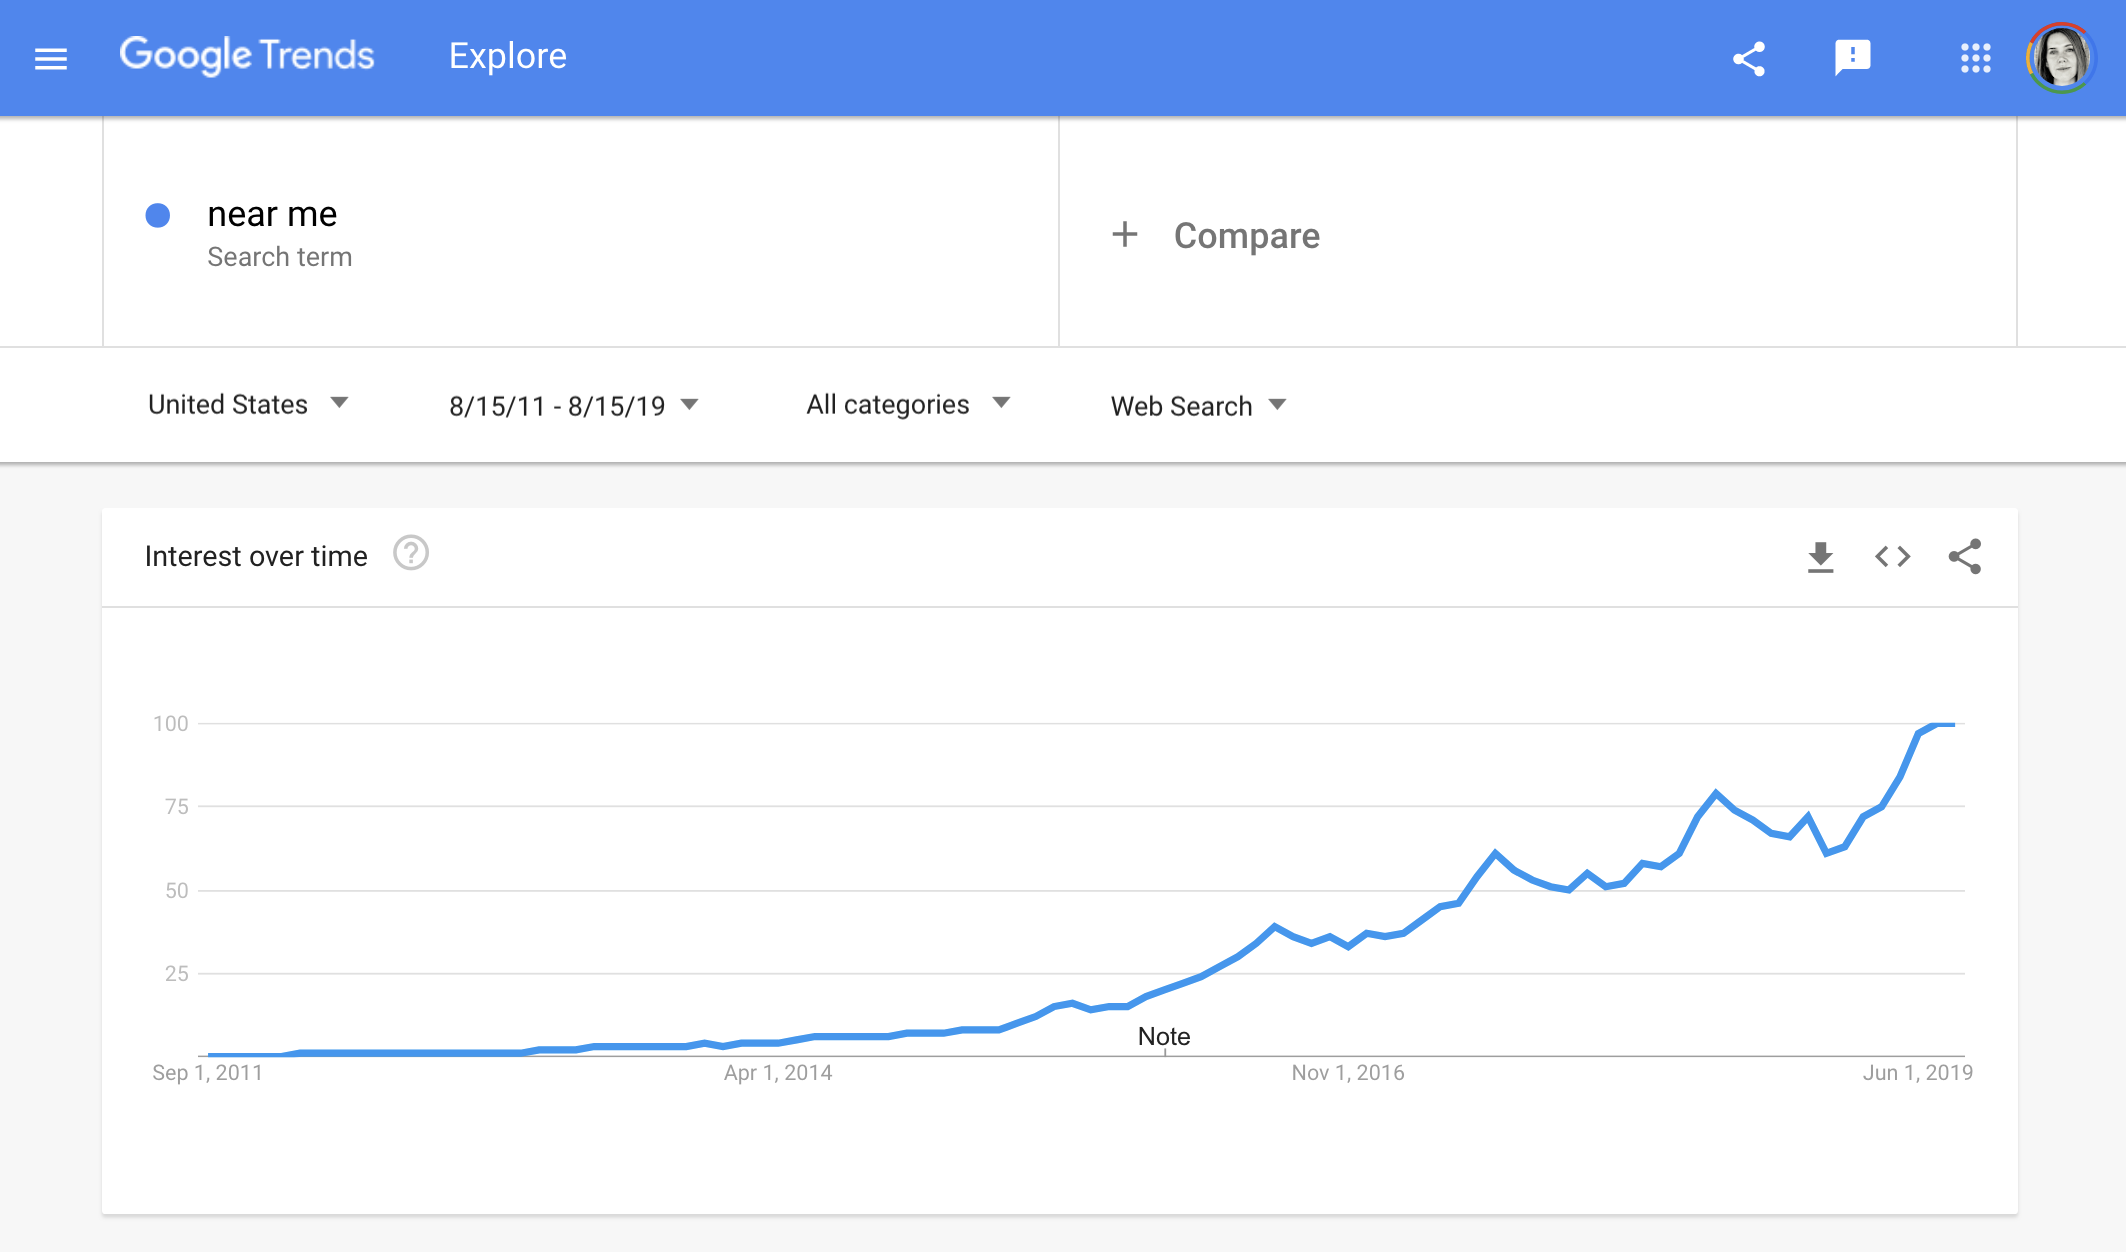 how much "near me" searches have increased in the last few years